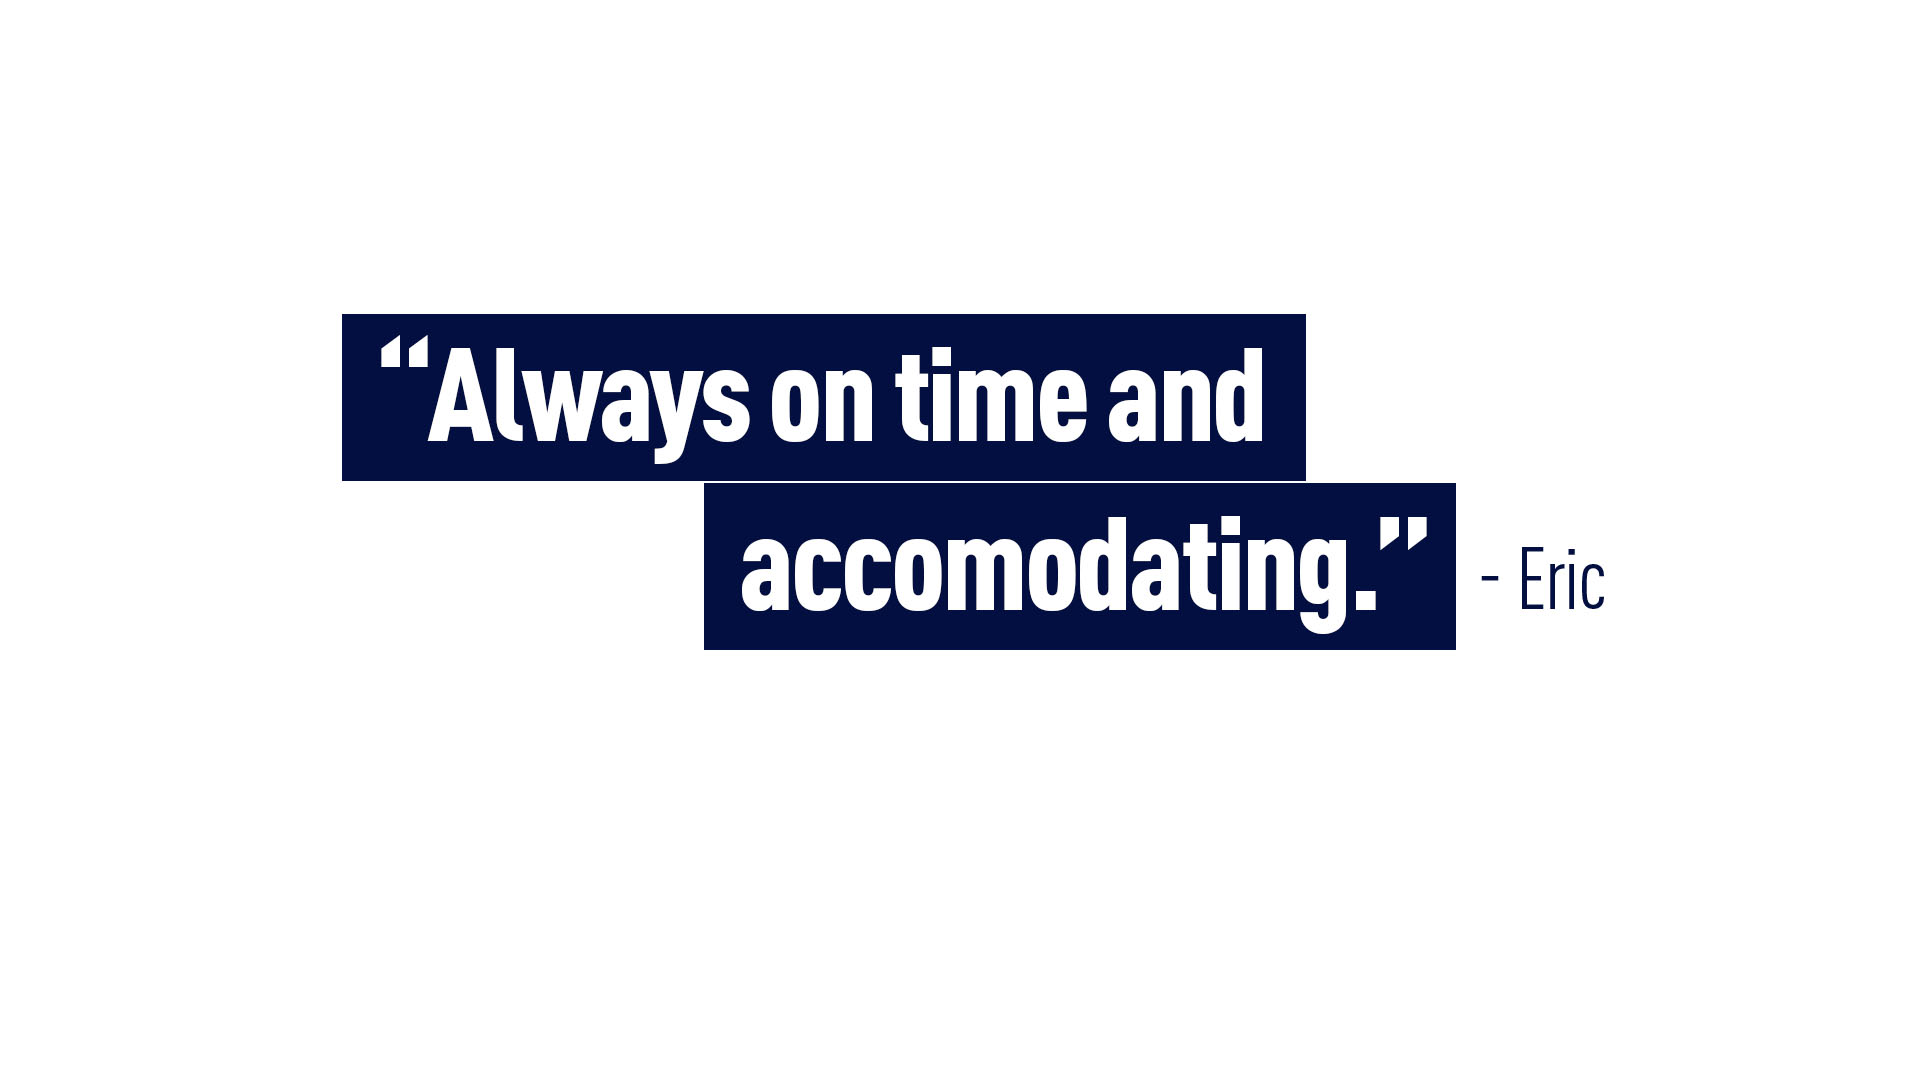 Eric – “Always on time and accommodating.”